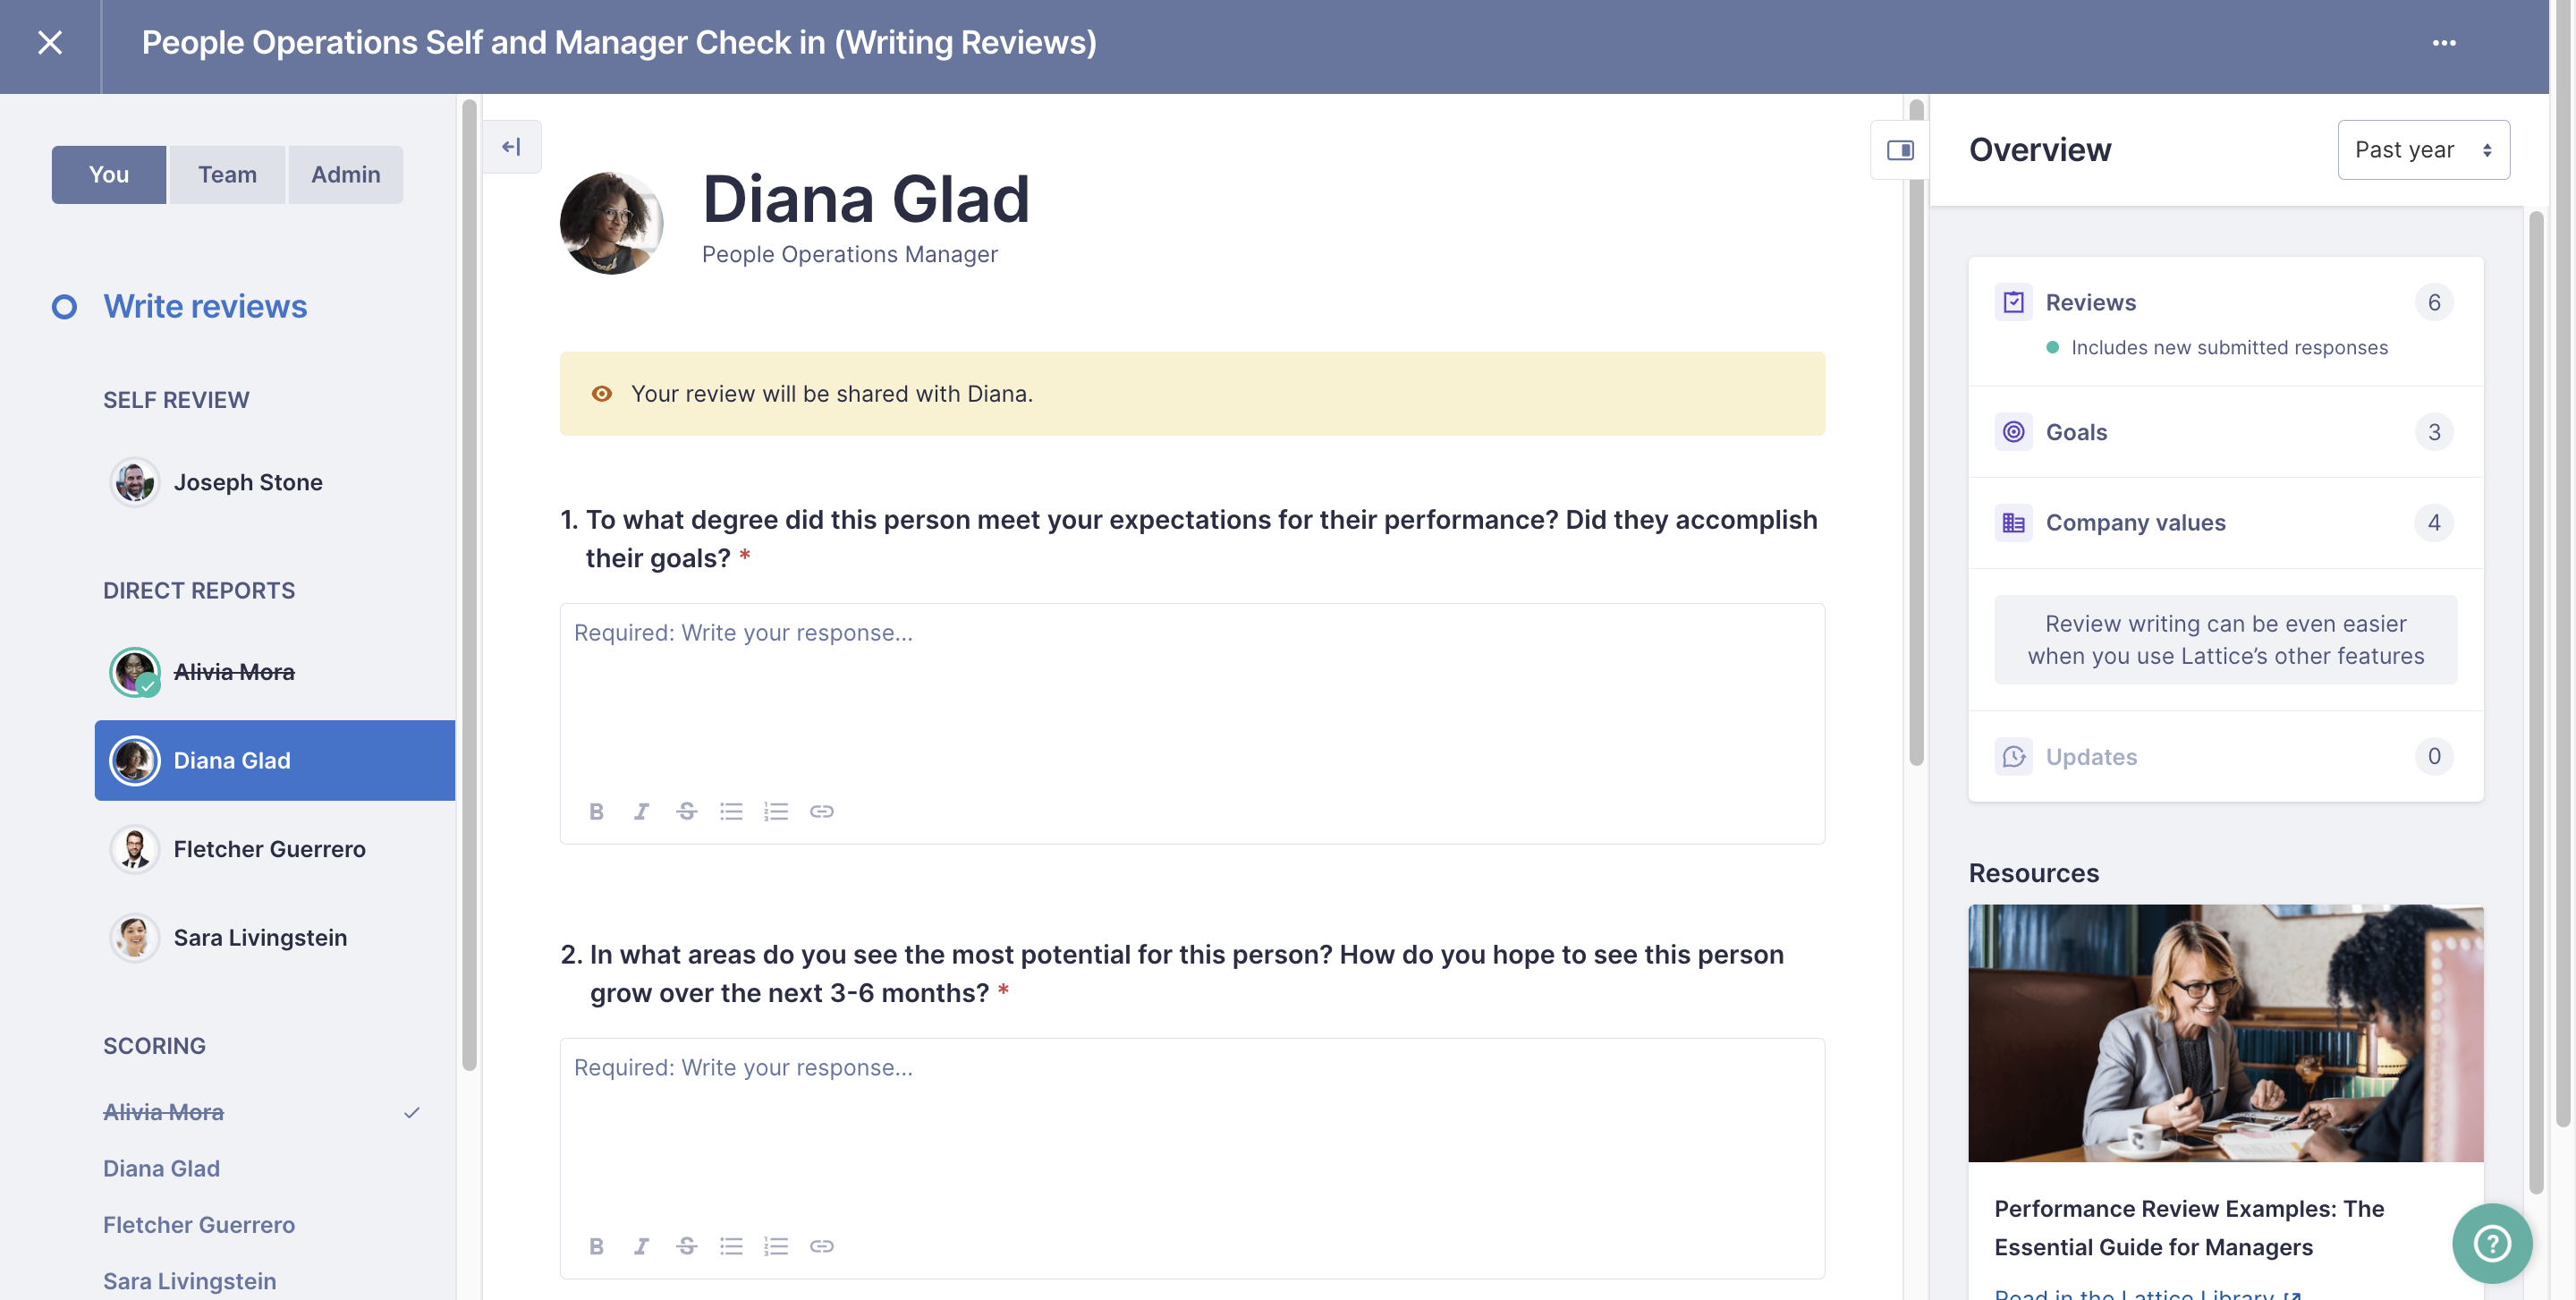 Reviews page open to the employee Diana Glad's review. On the left hand side, a list of all the reviews you need to complete can be seen under the Write Reviews section. In the middle, the review questions can be seen. On the righthand side, the Overview Context panel that includes Past Reviews, Goals, Company values, and Updates for Diana can be seen.